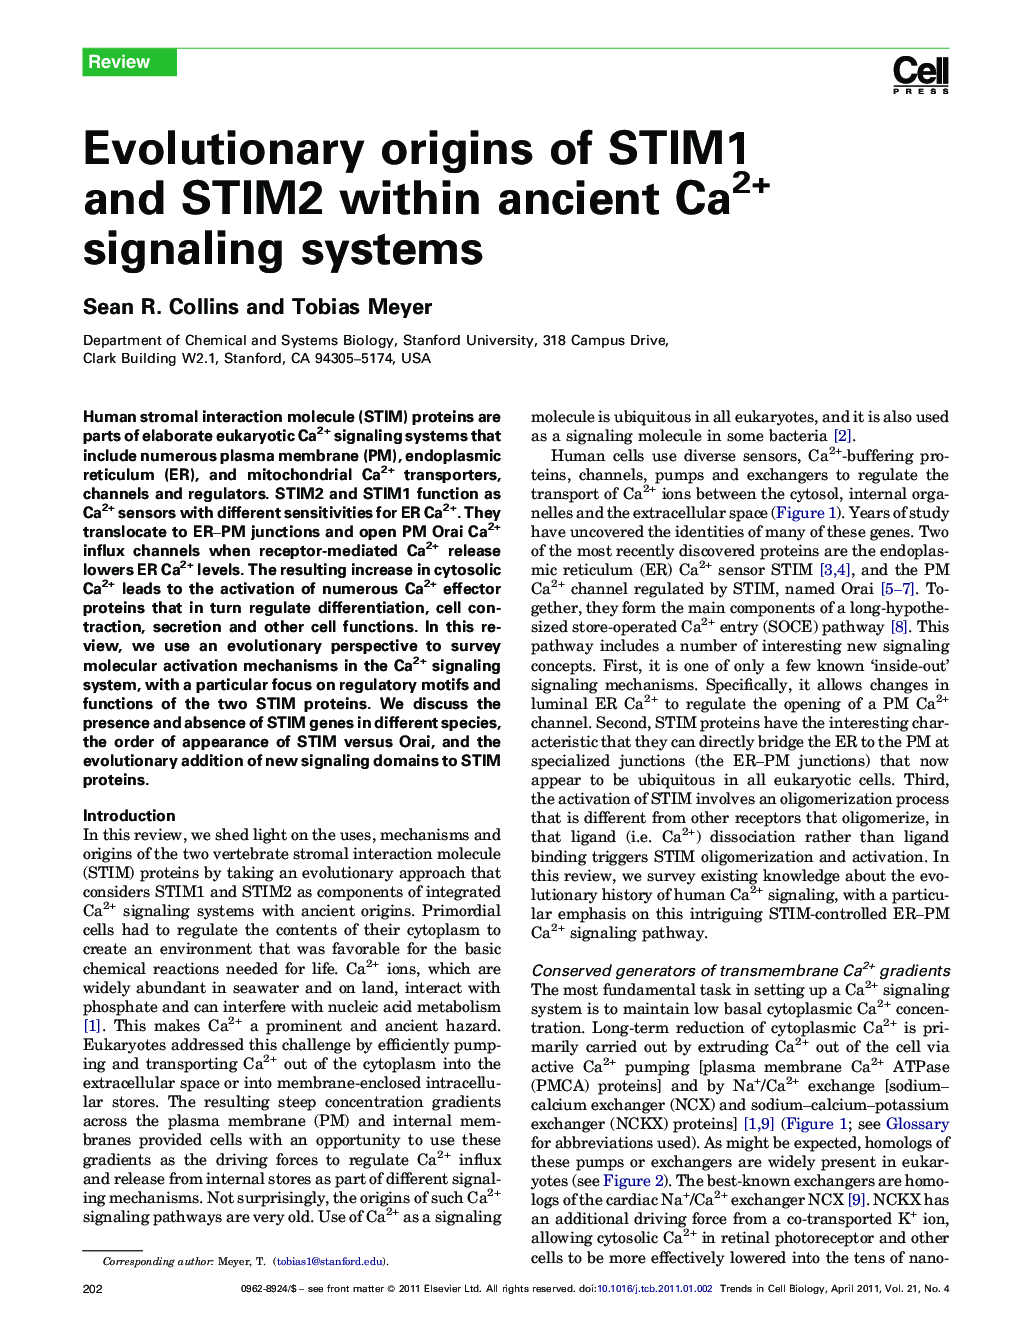 Evolutionary origins of STIM1 and STIM2 within ancient Ca2+ signaling systems